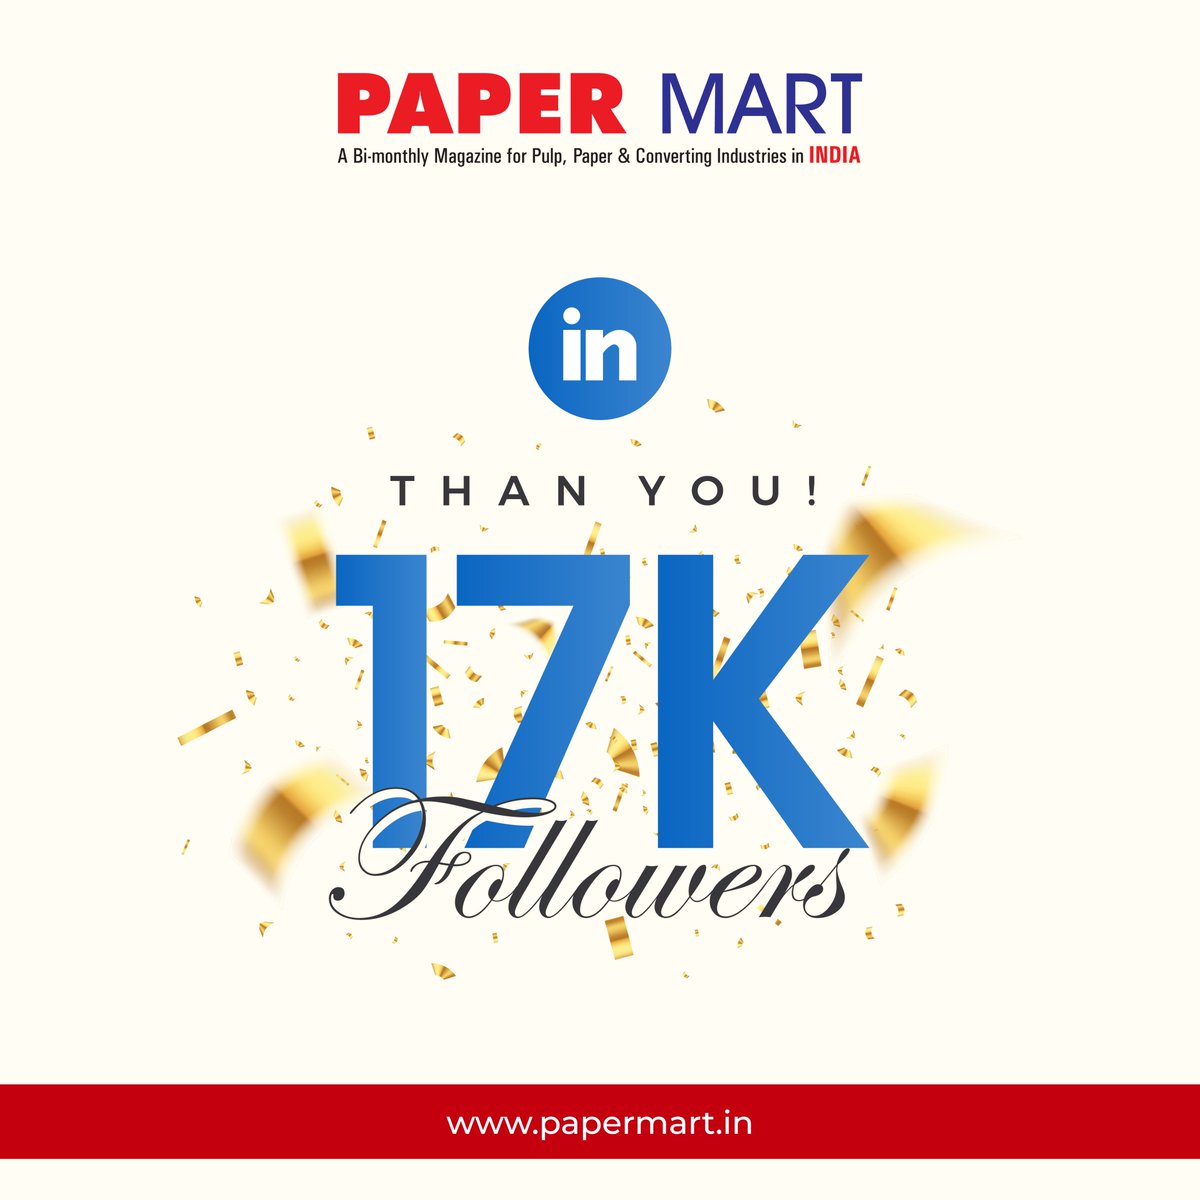 We are excited to share that @PAPERMART_ recently hit the 17000+ follower mark on our #LinkedInPage. 

Not a ‘follower’ yet? Join us Now on LinkedIn: linkedin.com/company/paper-…

#PaperMart #PaperMartIndia #Followers #LinkedinFollowers #PaperIndustry #IndustryNews #17K #PulpIndustry